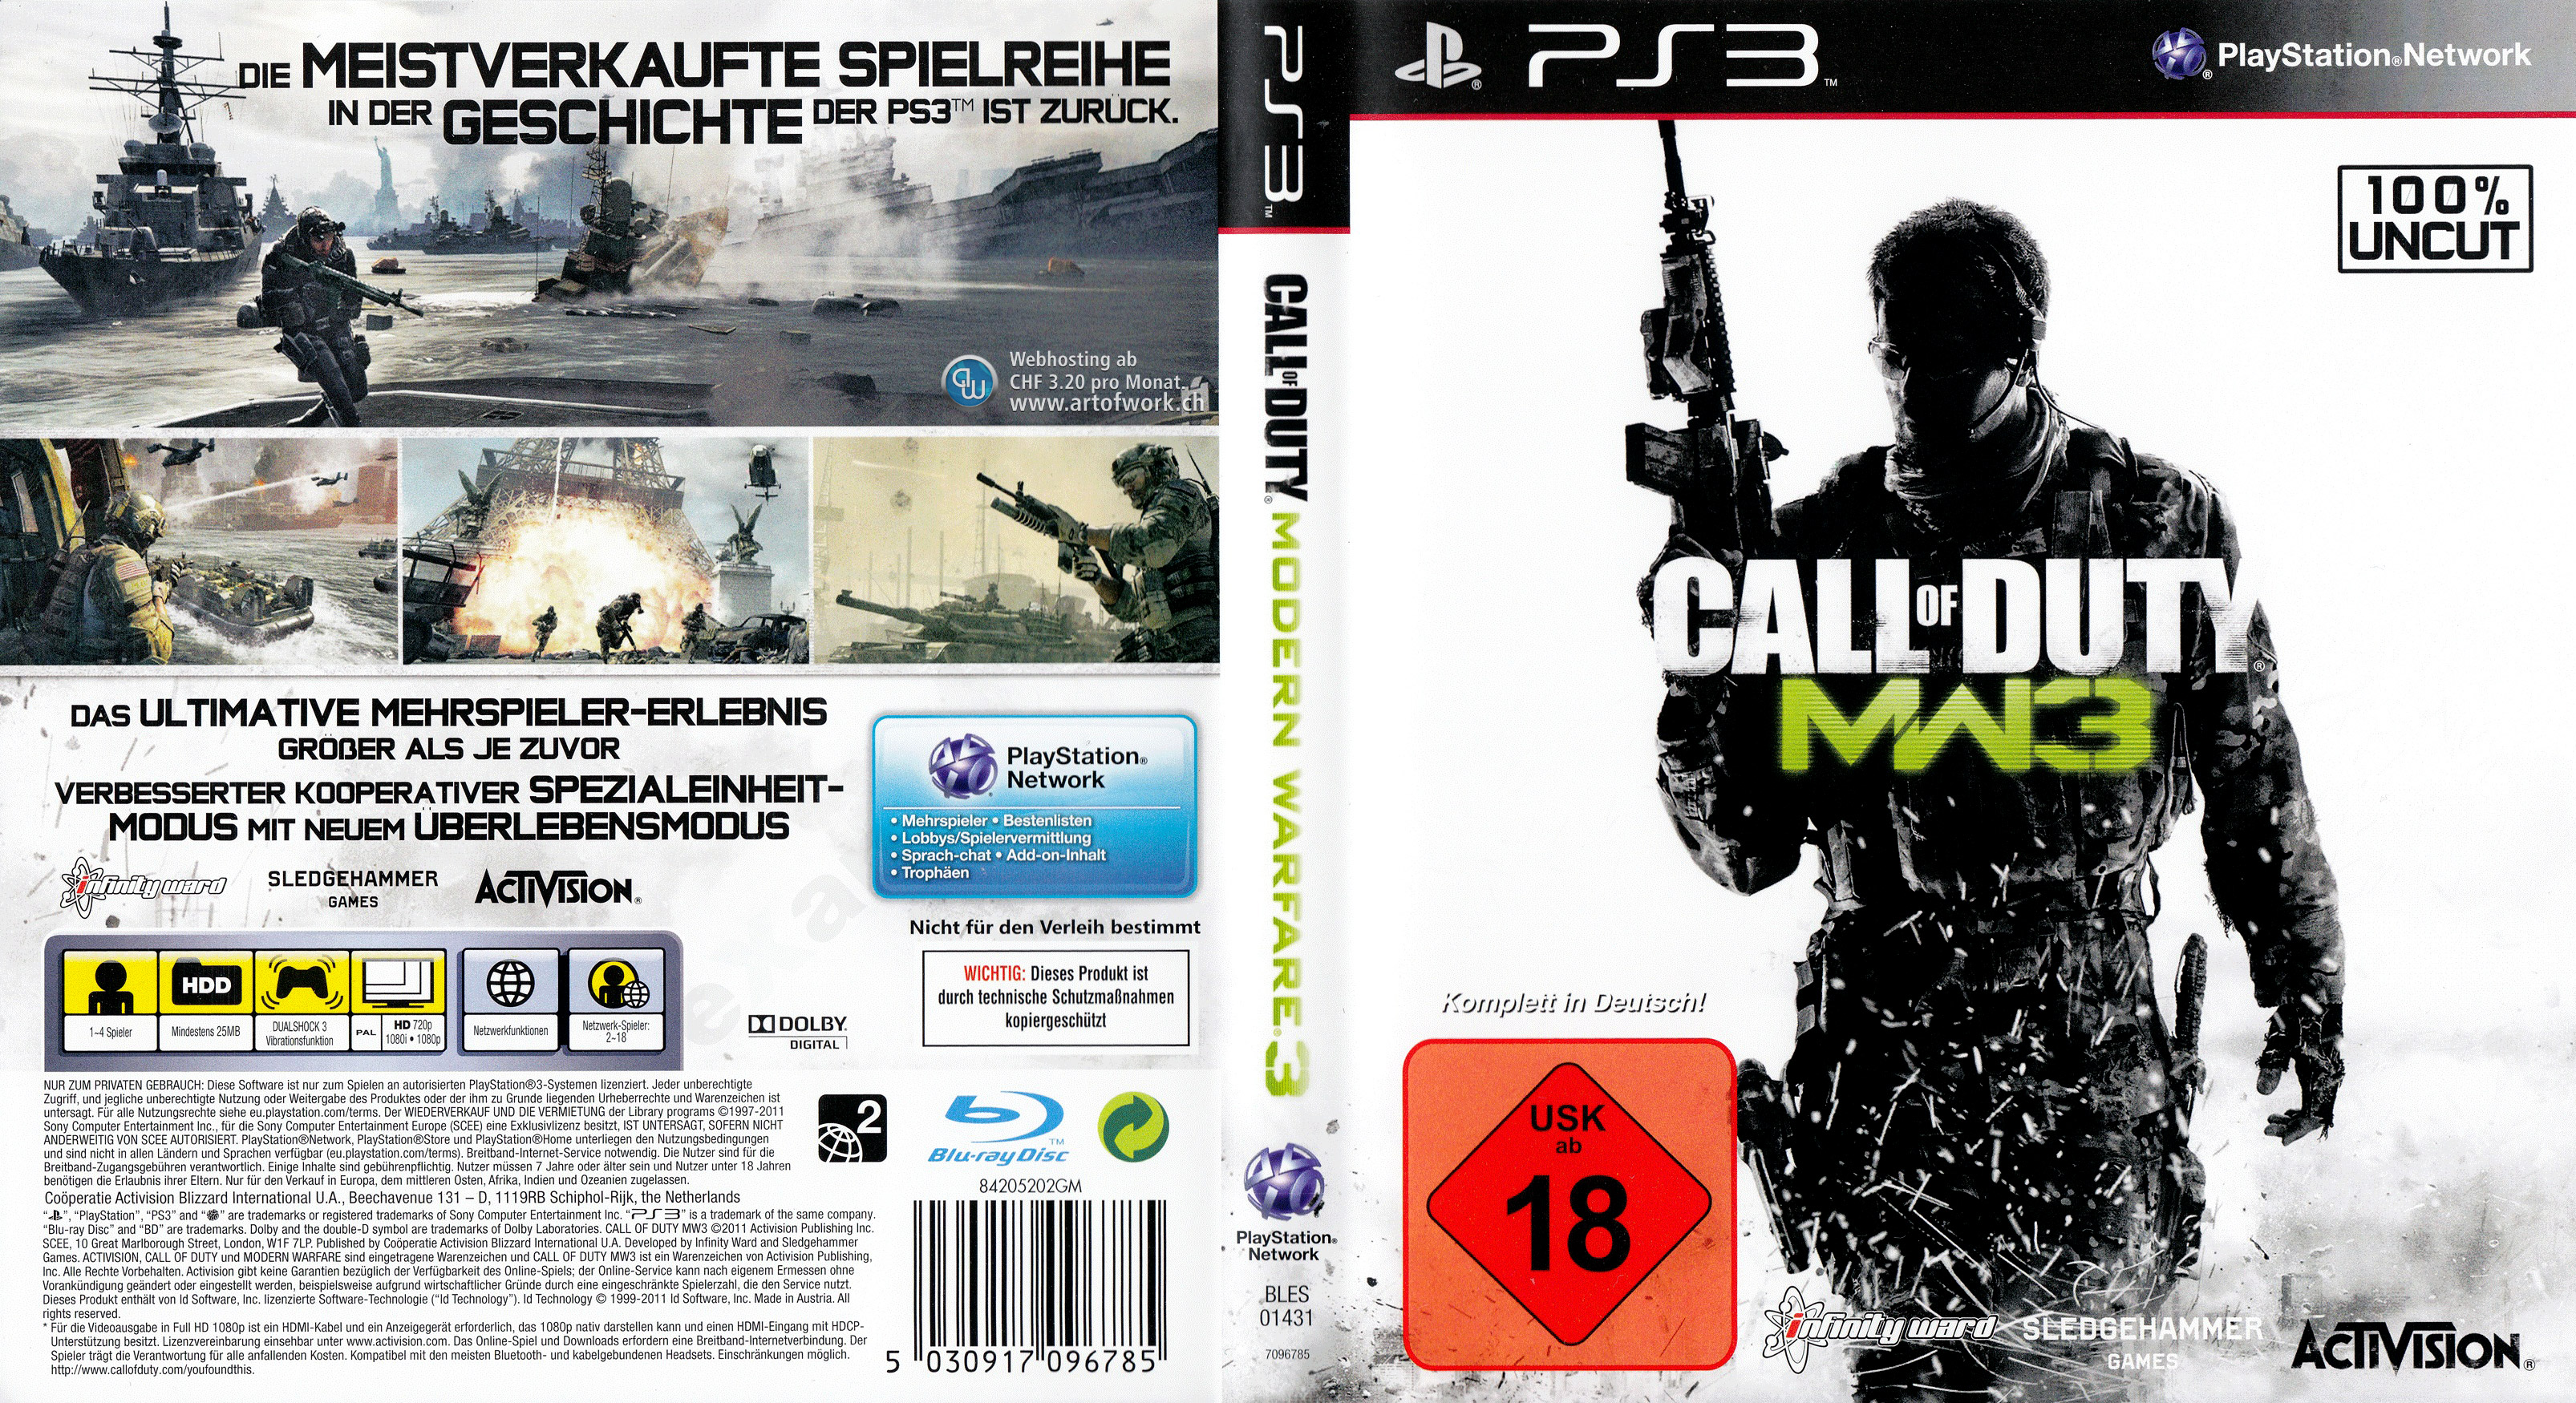 Call Of Duty Modern Warfare 3 V2 Playstation 3 Covers Cover Century Over 500 000 Album Art Covers For Free